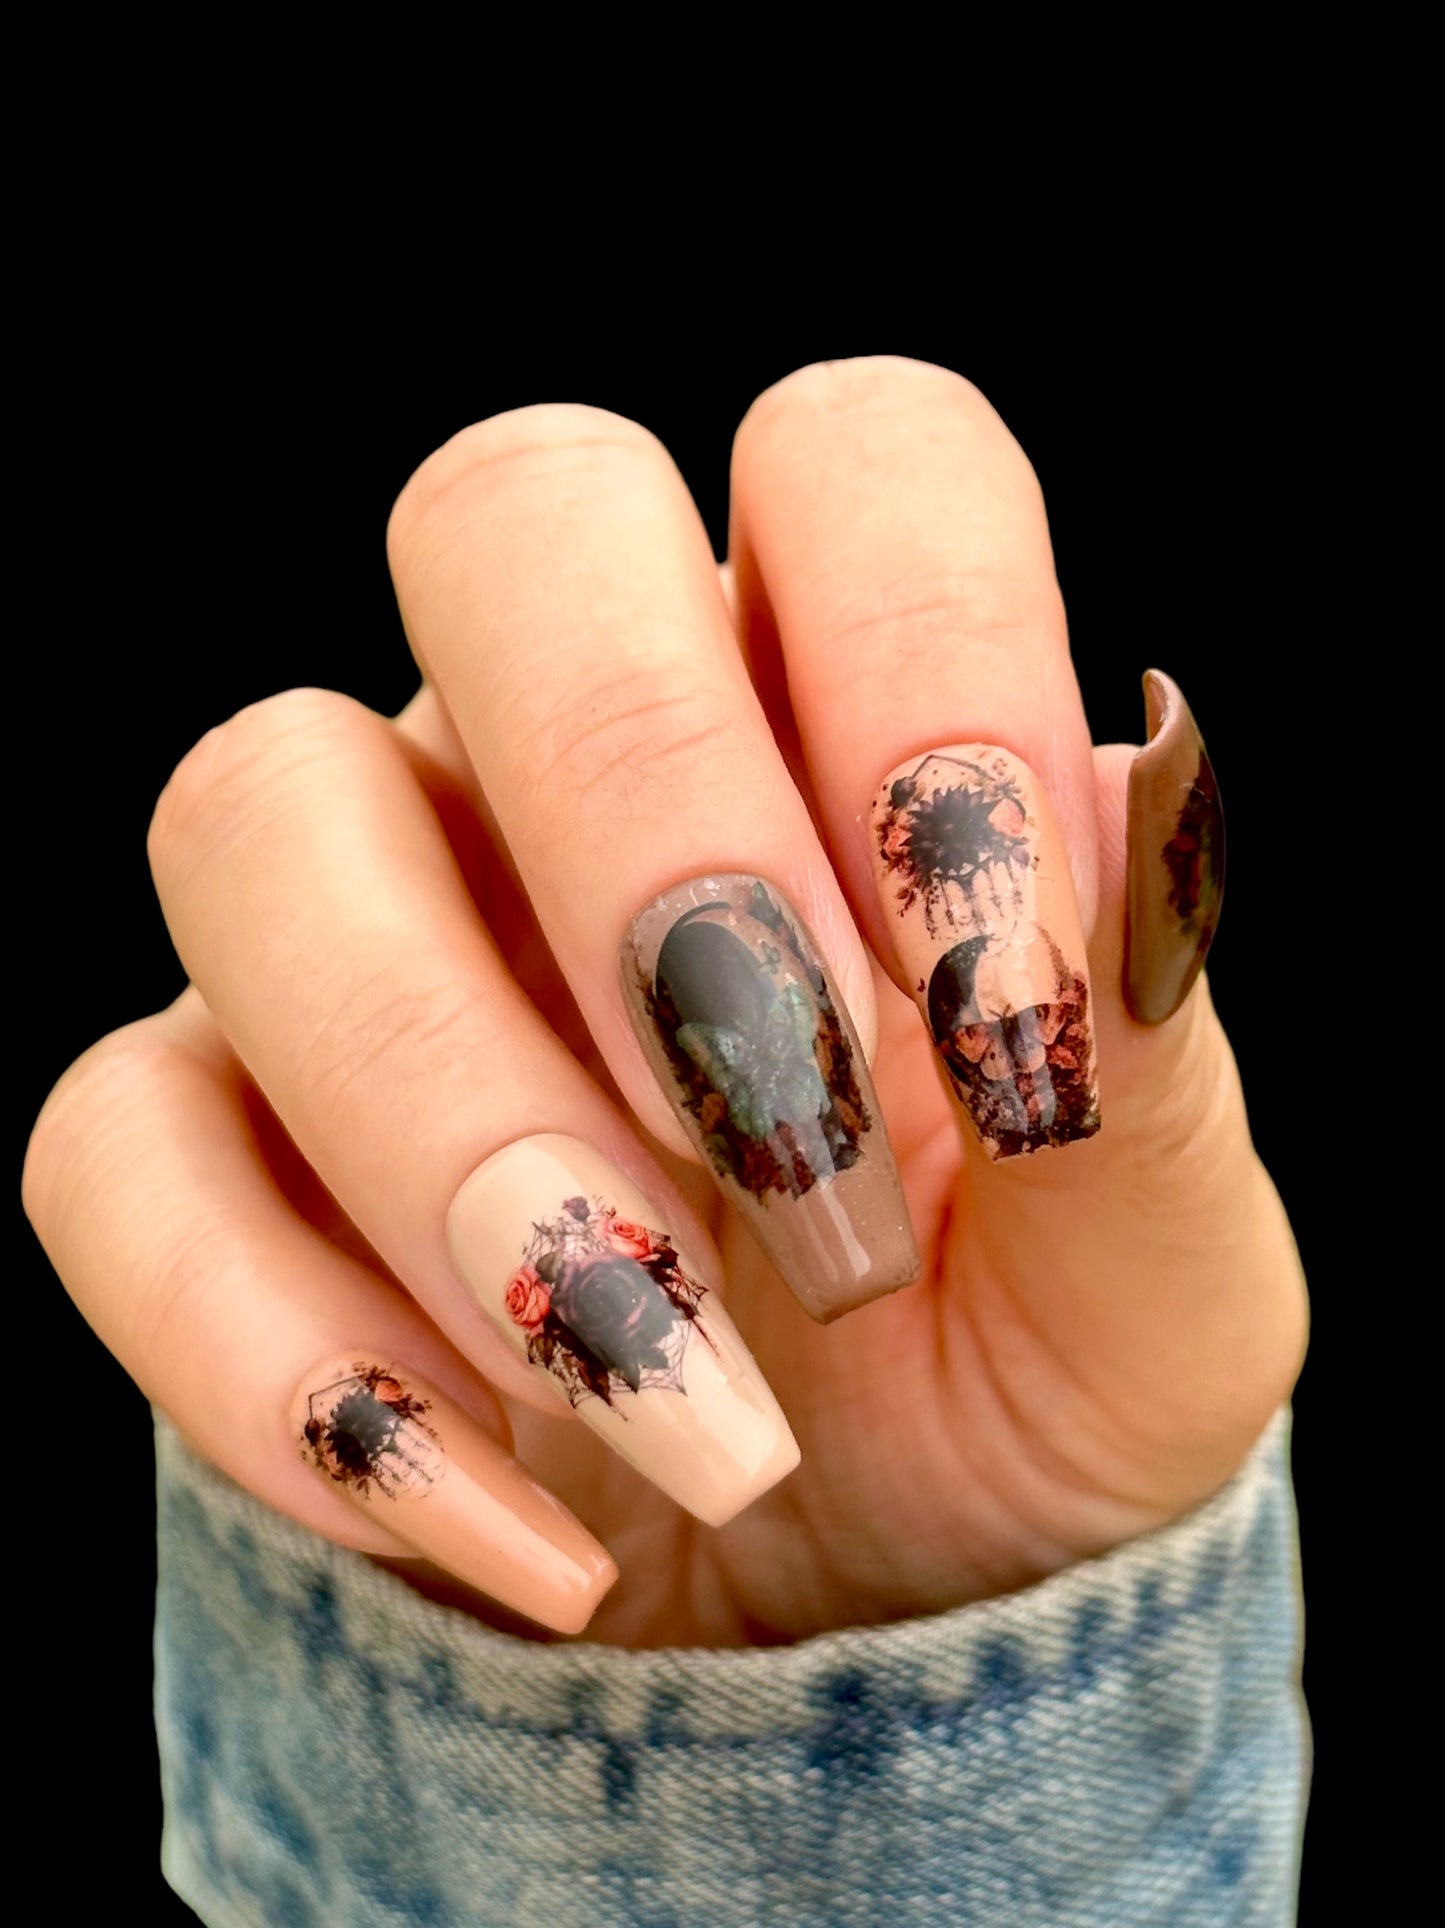 GOTHIC, NAILS, HALLOWEEN-Moths In The Moon - Decals For Nails